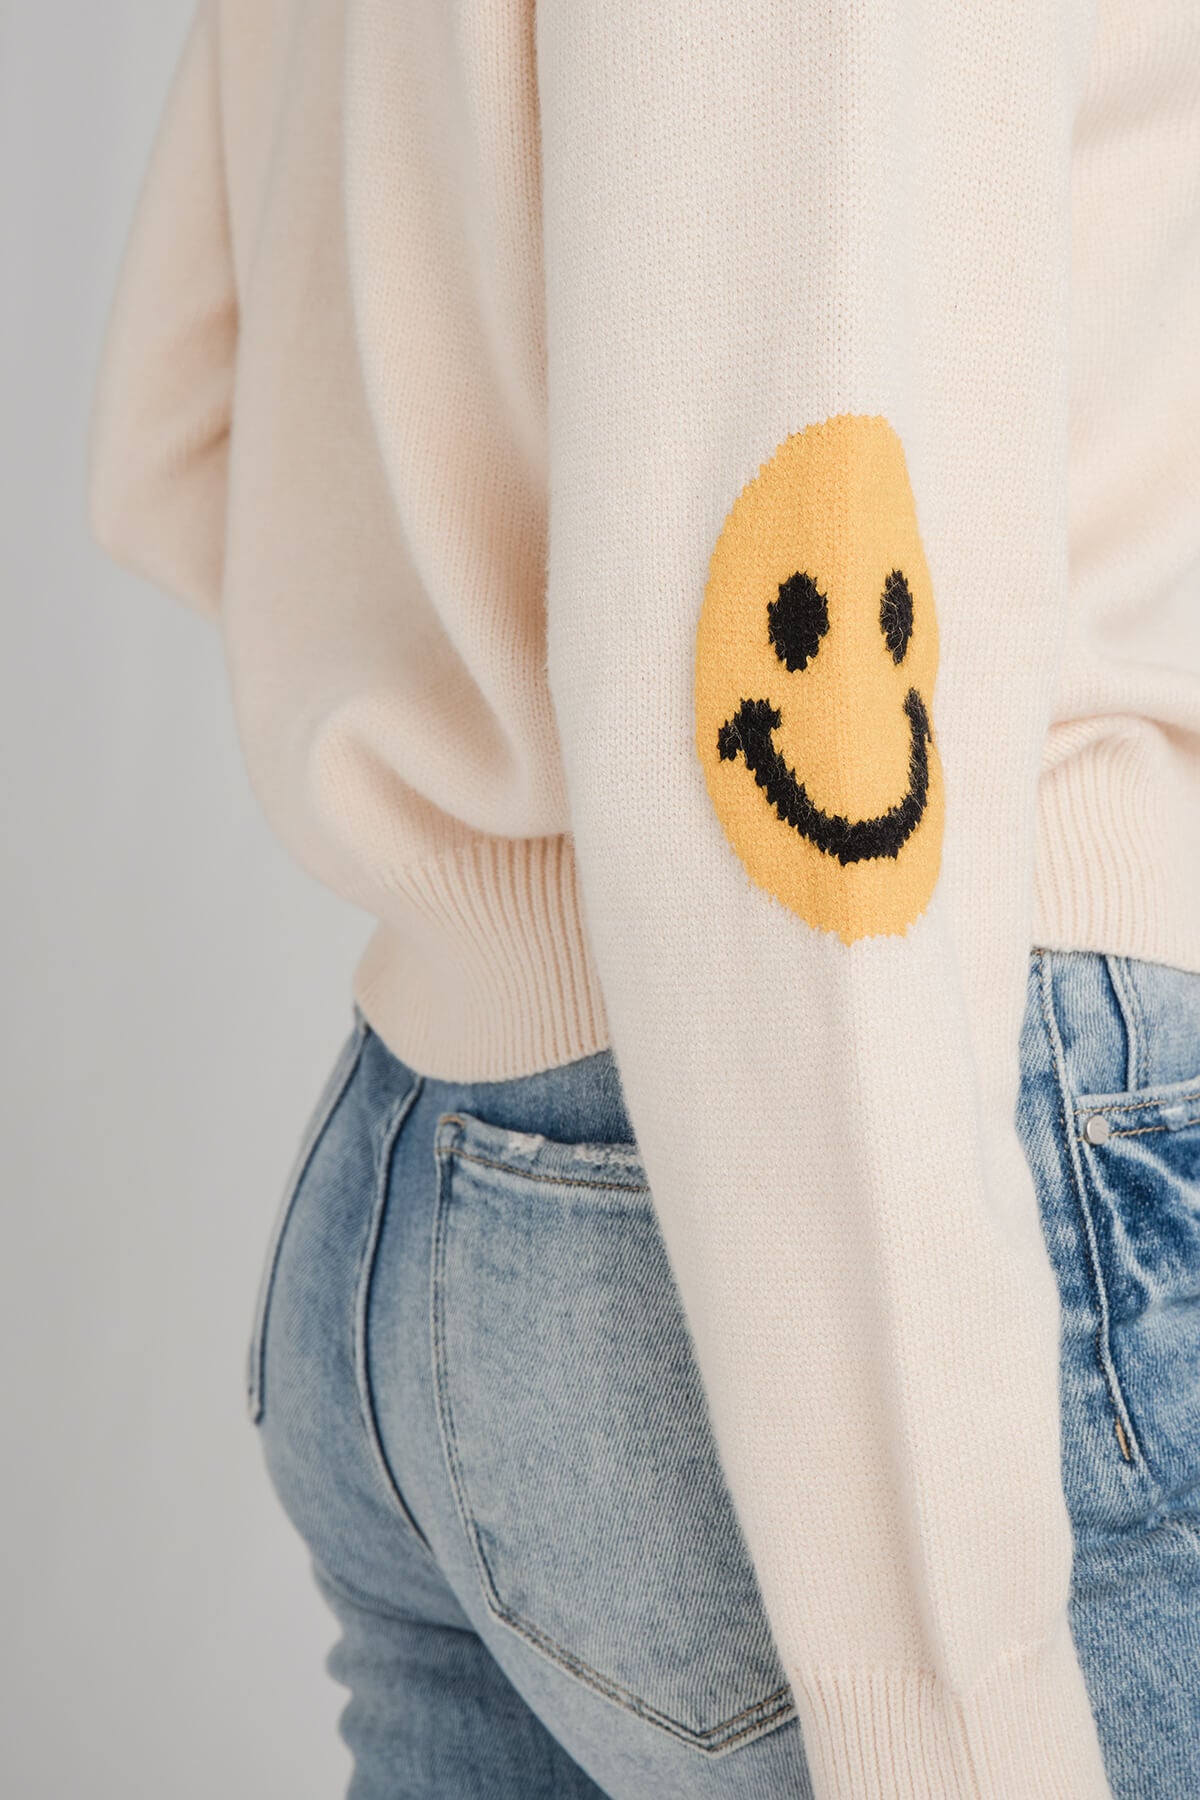 THML Smiley Sleeve Knit Sweater